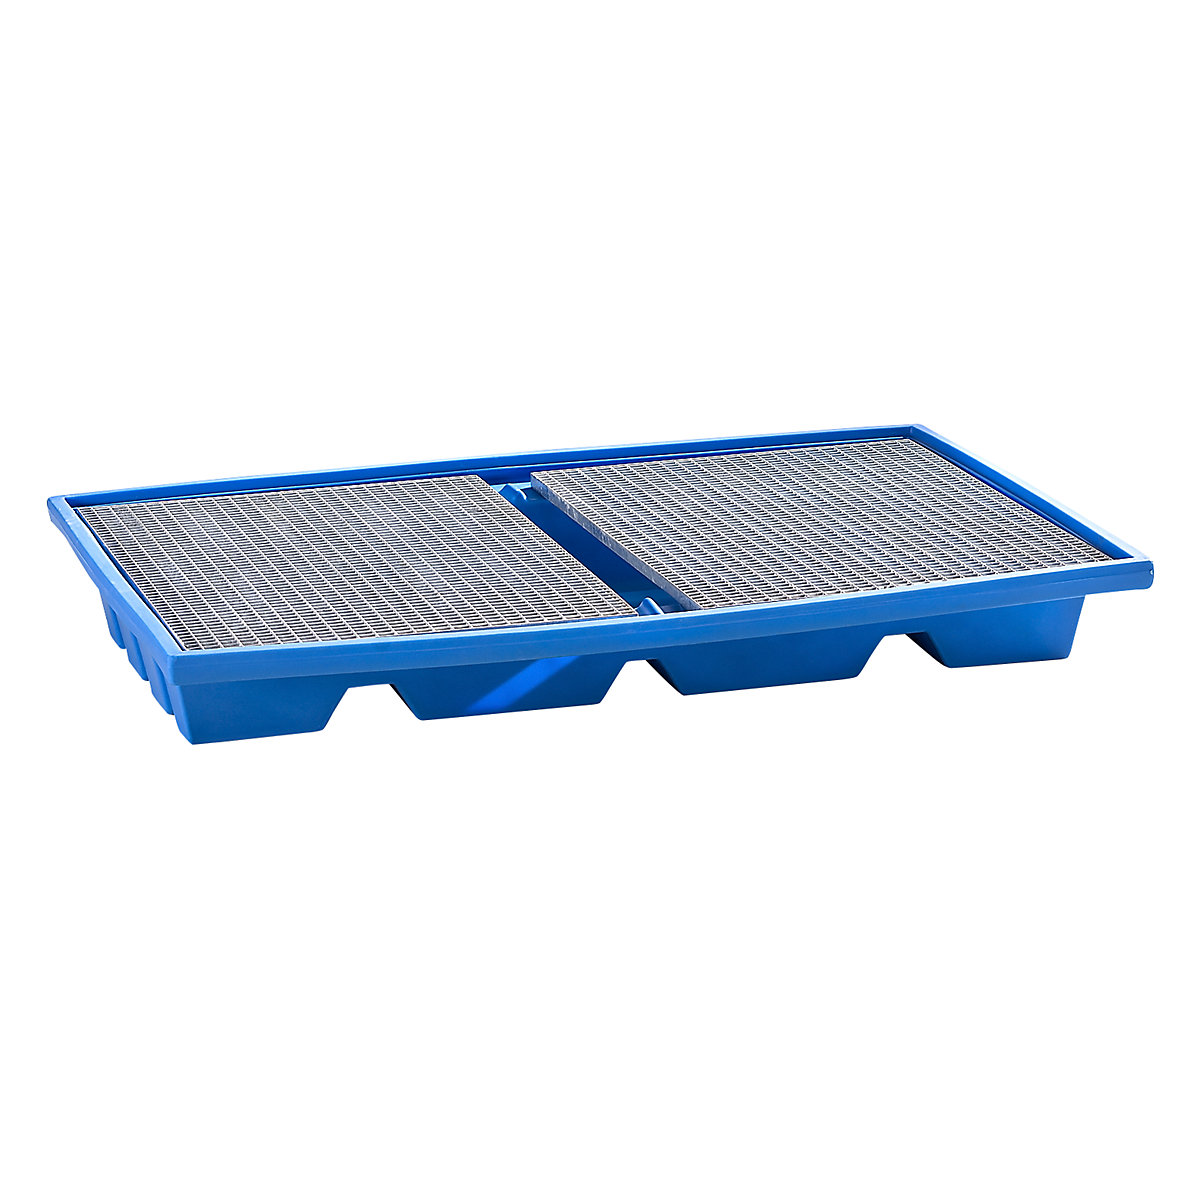 Hook-in sump tray